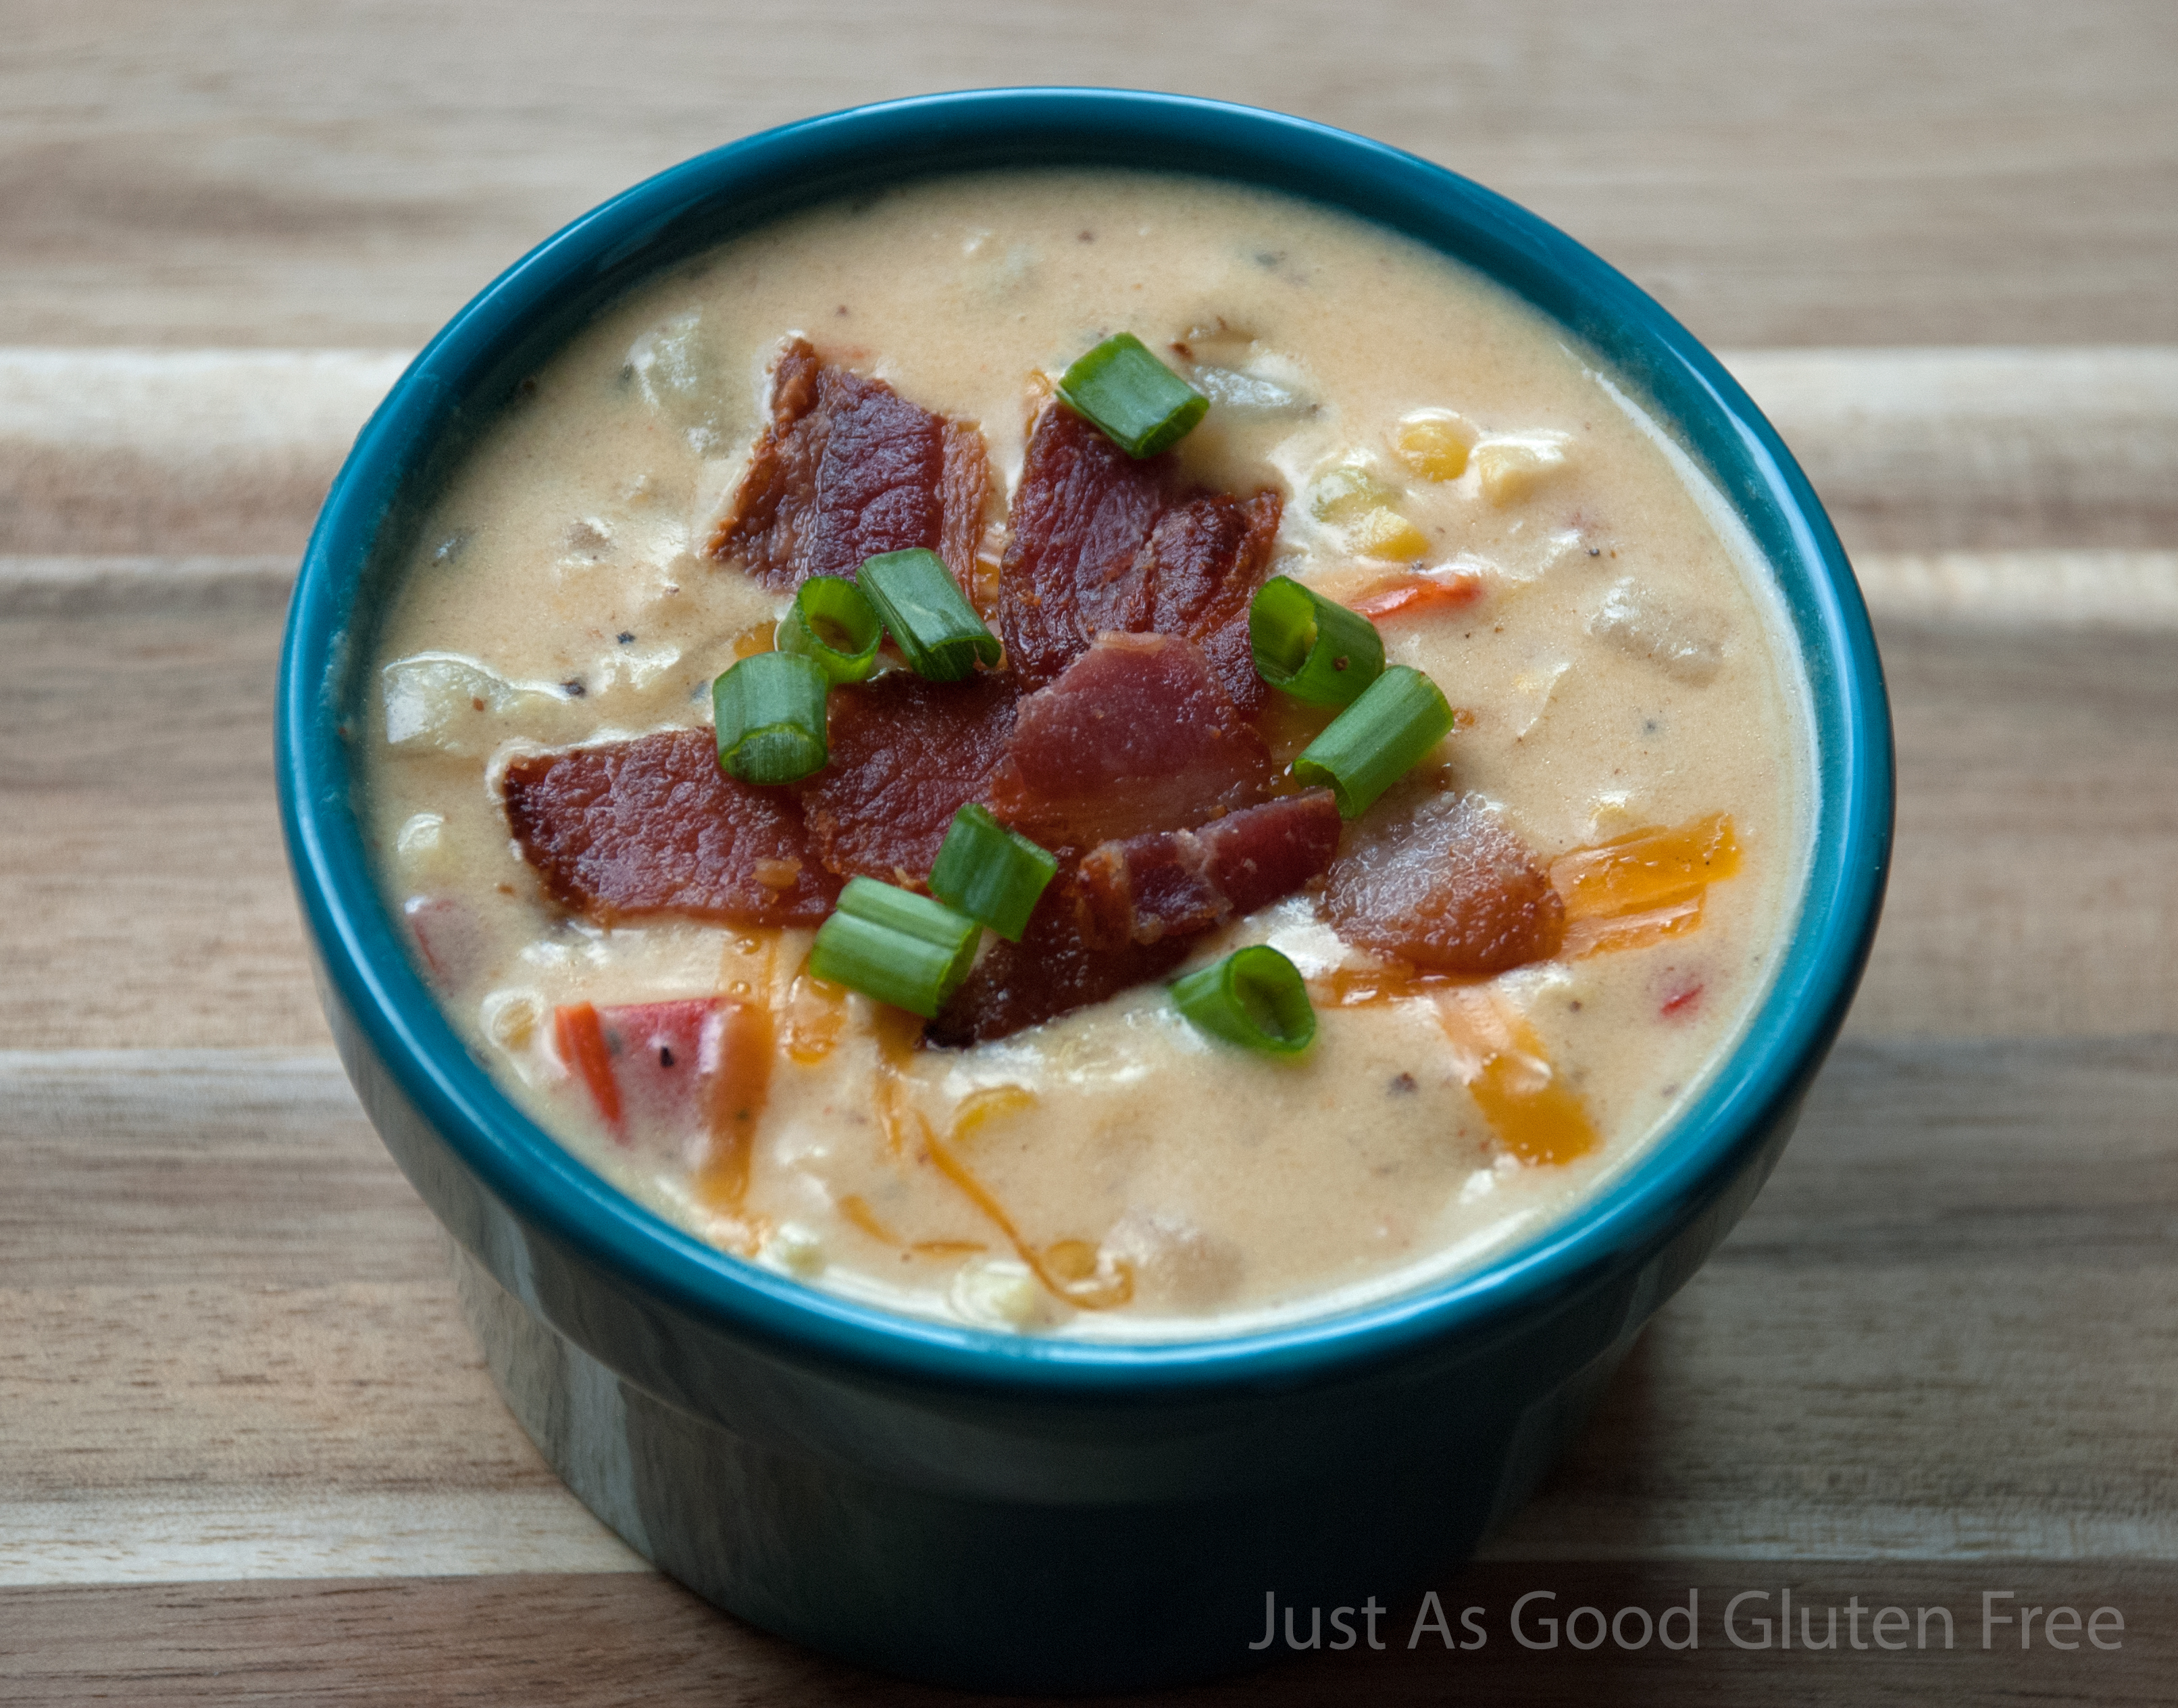 Gluten Free Creamy Corn Chowder with Toppings